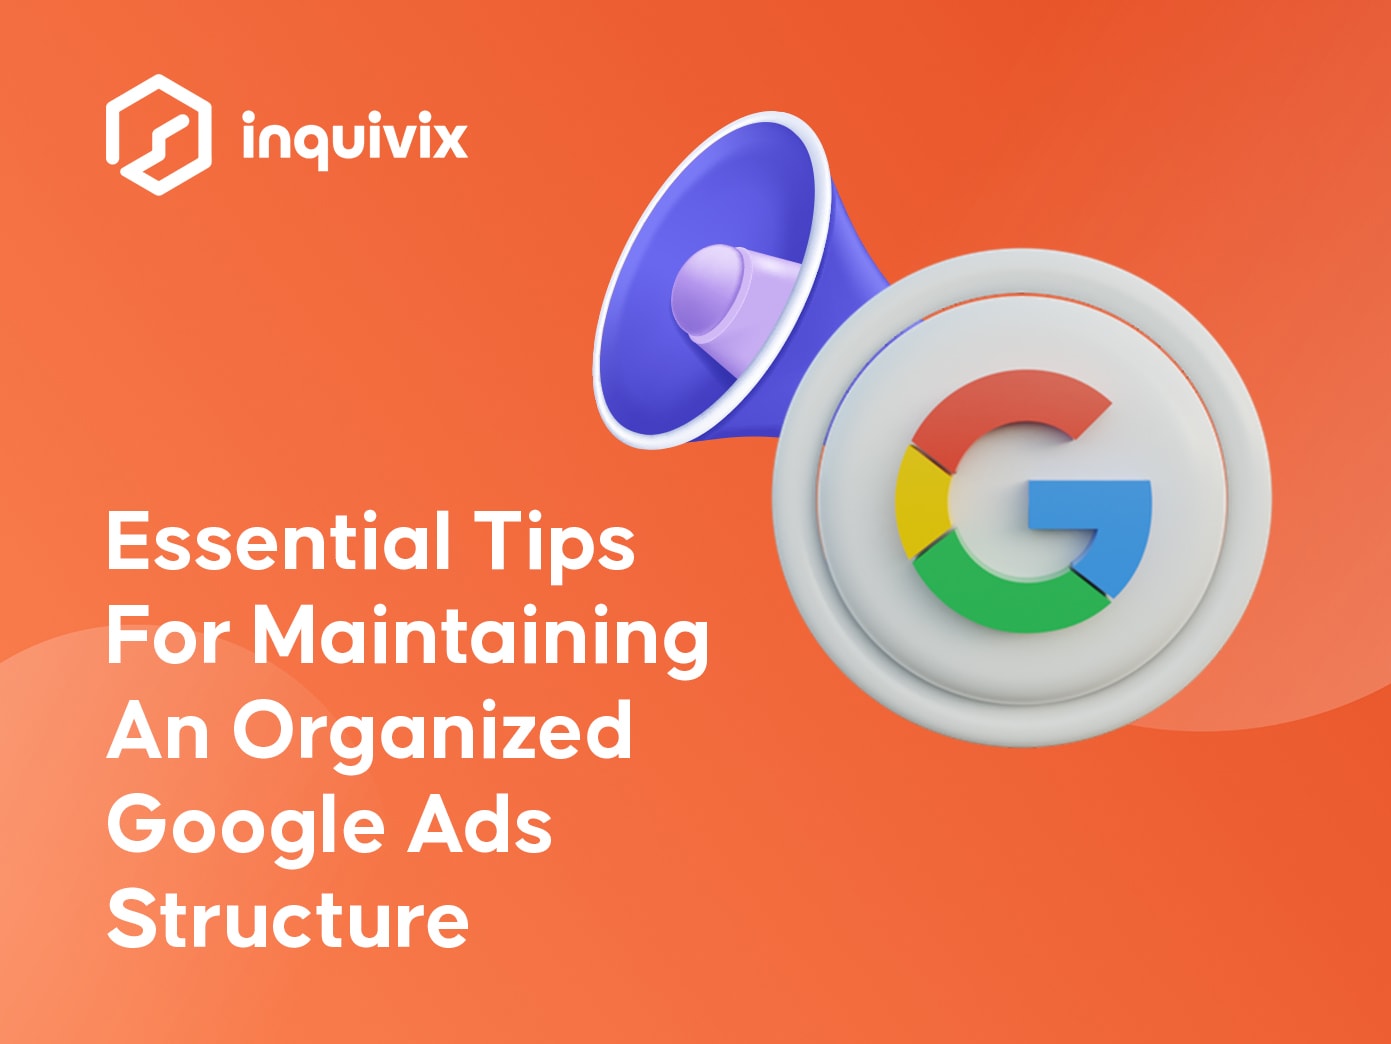 Essential Tips For Maintaining An Organized Google Ads Structure | INQUIVIX